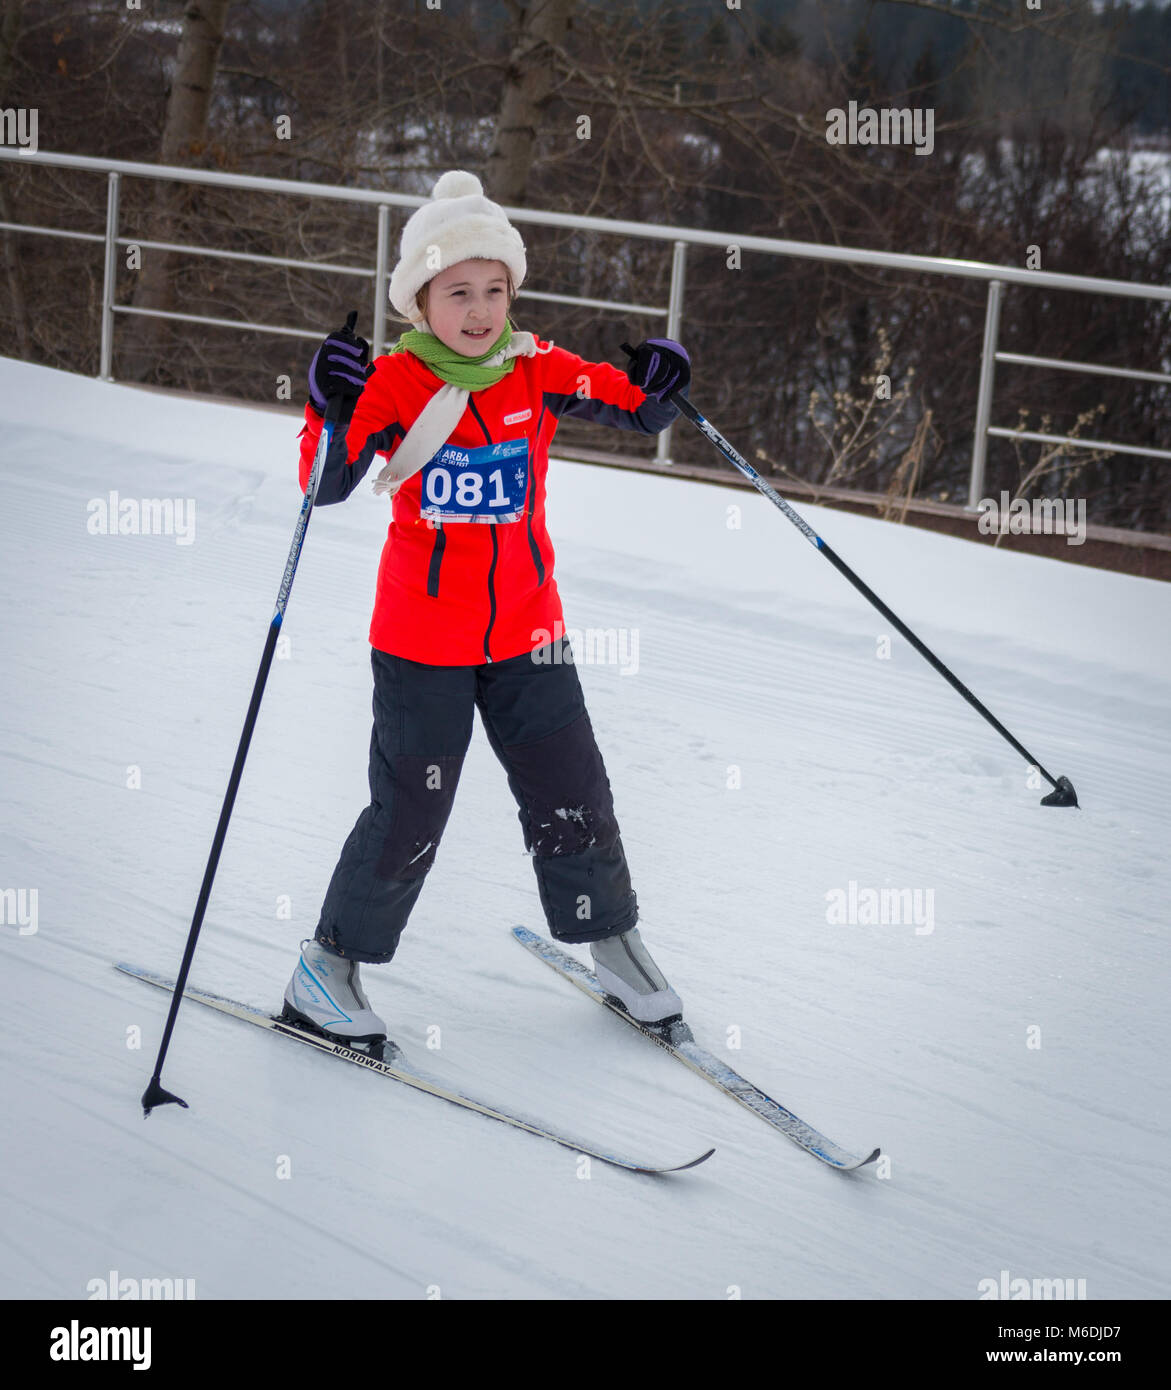 KAZAKHSTAN, ALMATY - FEBRUARY 25, 2018: Amateur cross-country skiing competitions of ARBA ski fest 2018. Participants from all over the republic compe Stock Photo